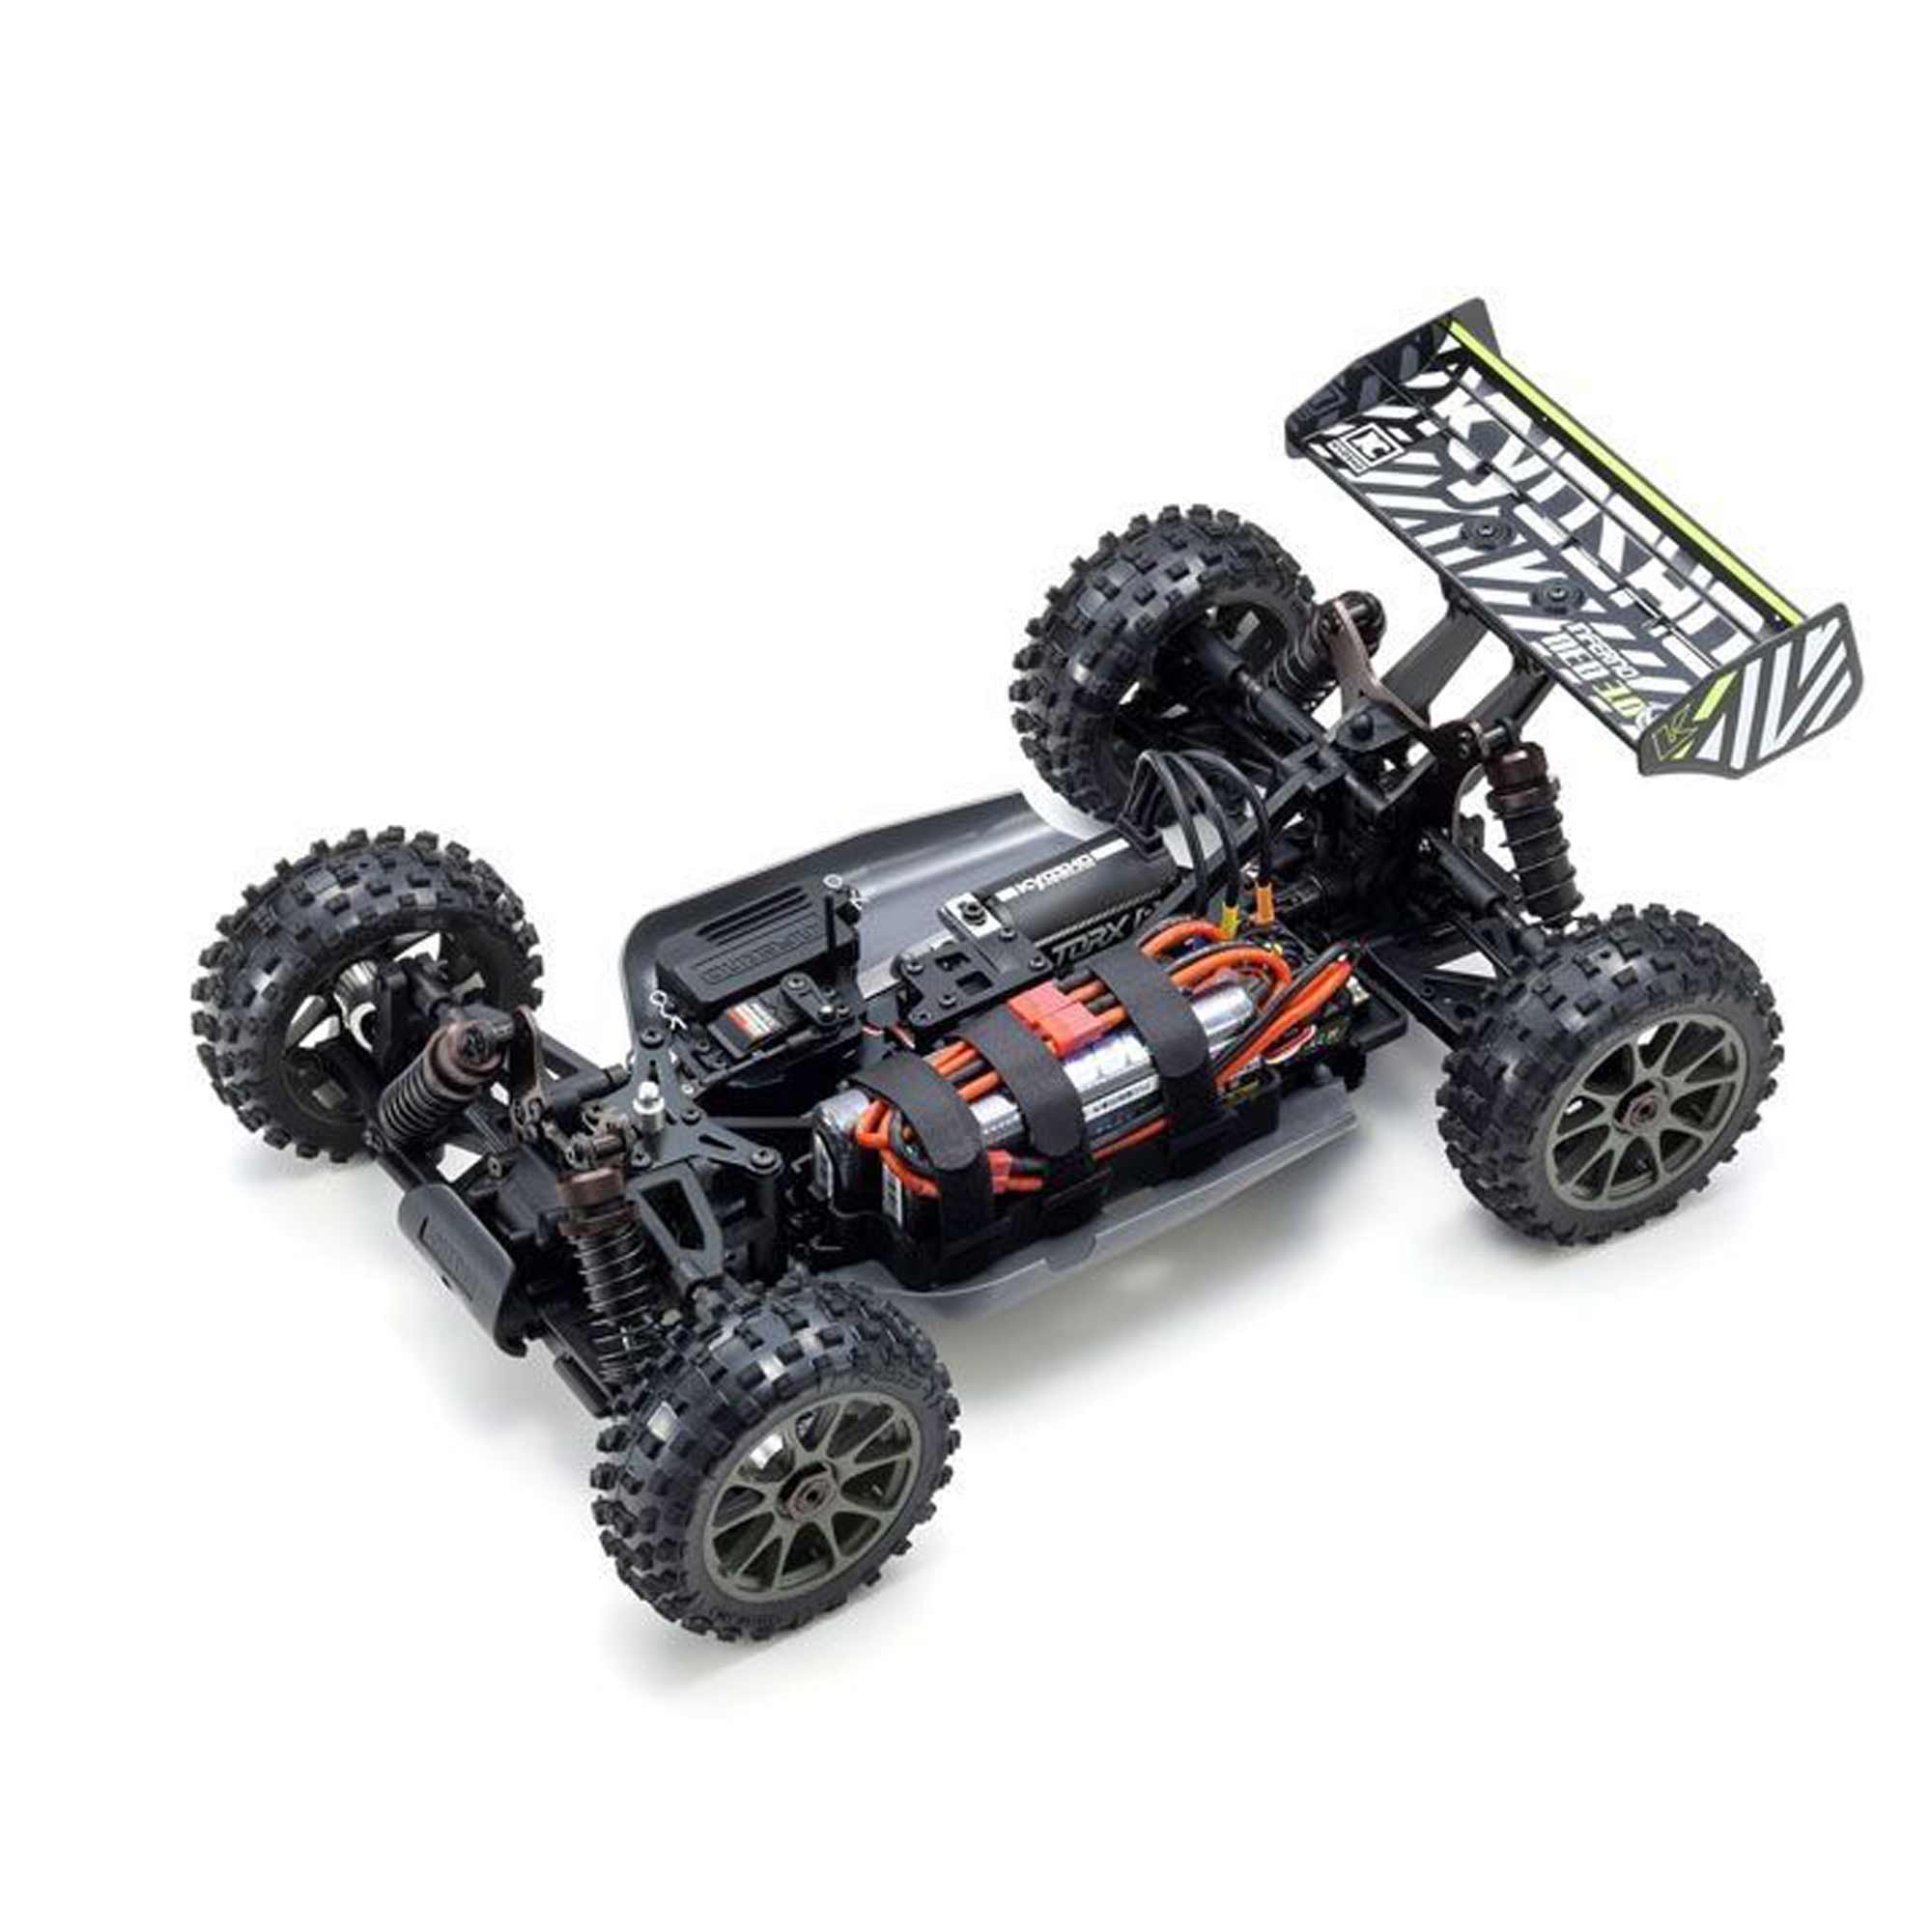 1/8 Inferno Neo3.0 VE 4X4 Off-Road 4S Brushless Buggy RTR, Green